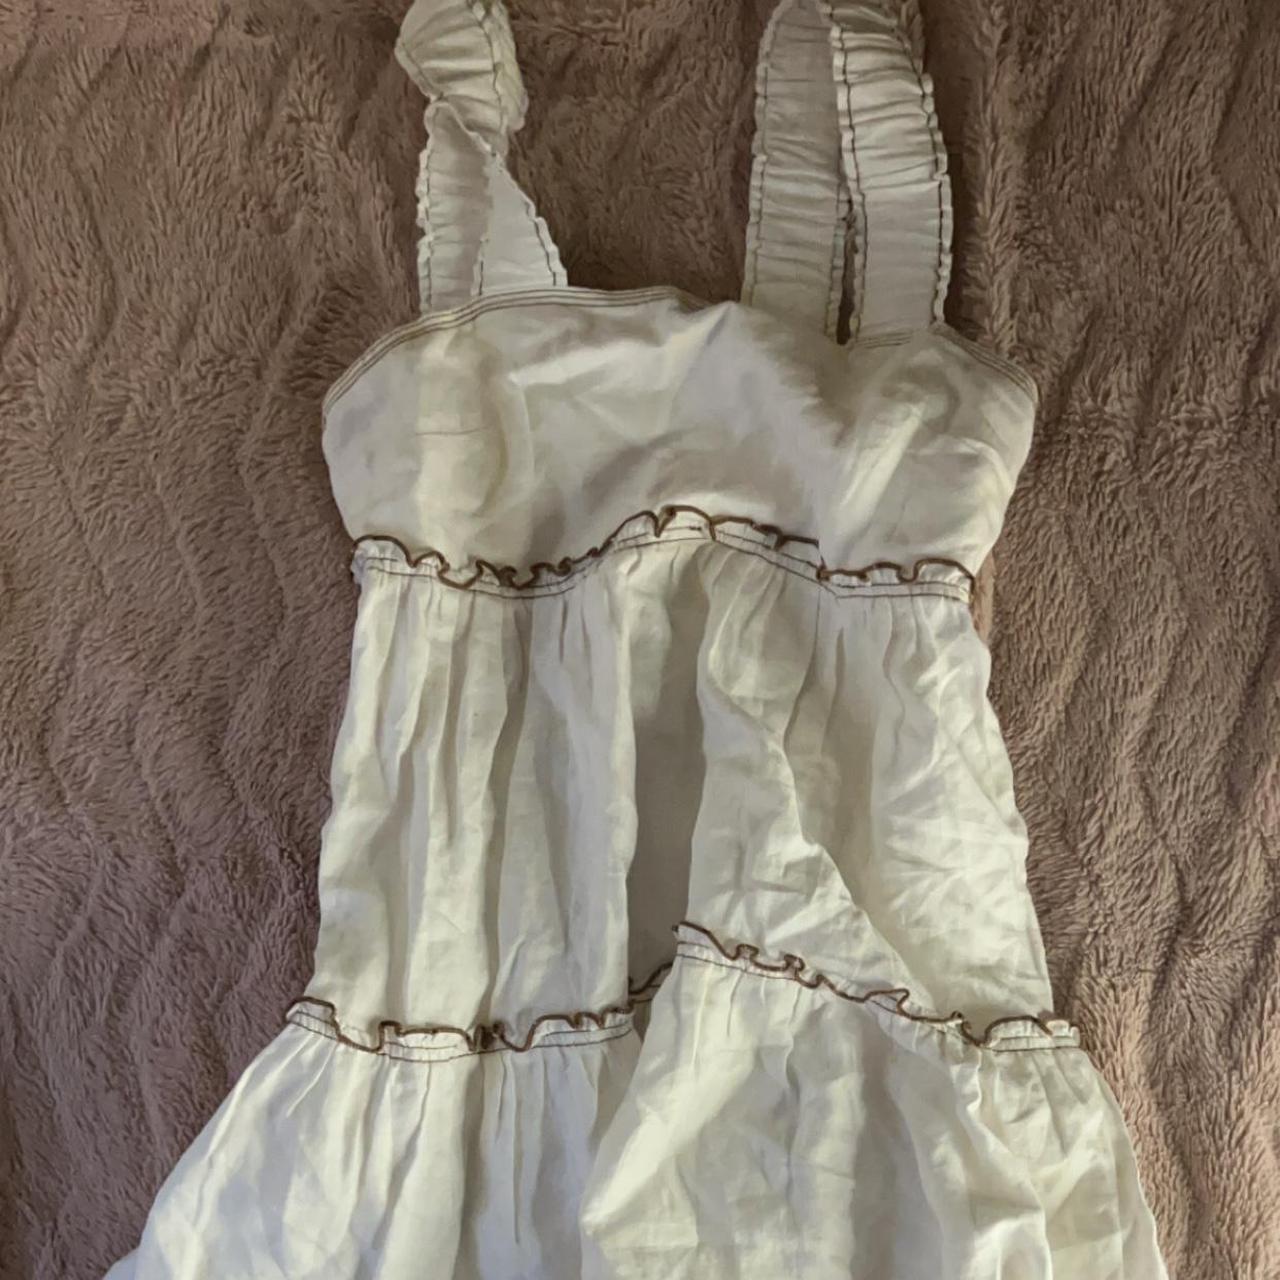 2000s Babydoll dress , prices negotiable 💘 Worn... - Depop